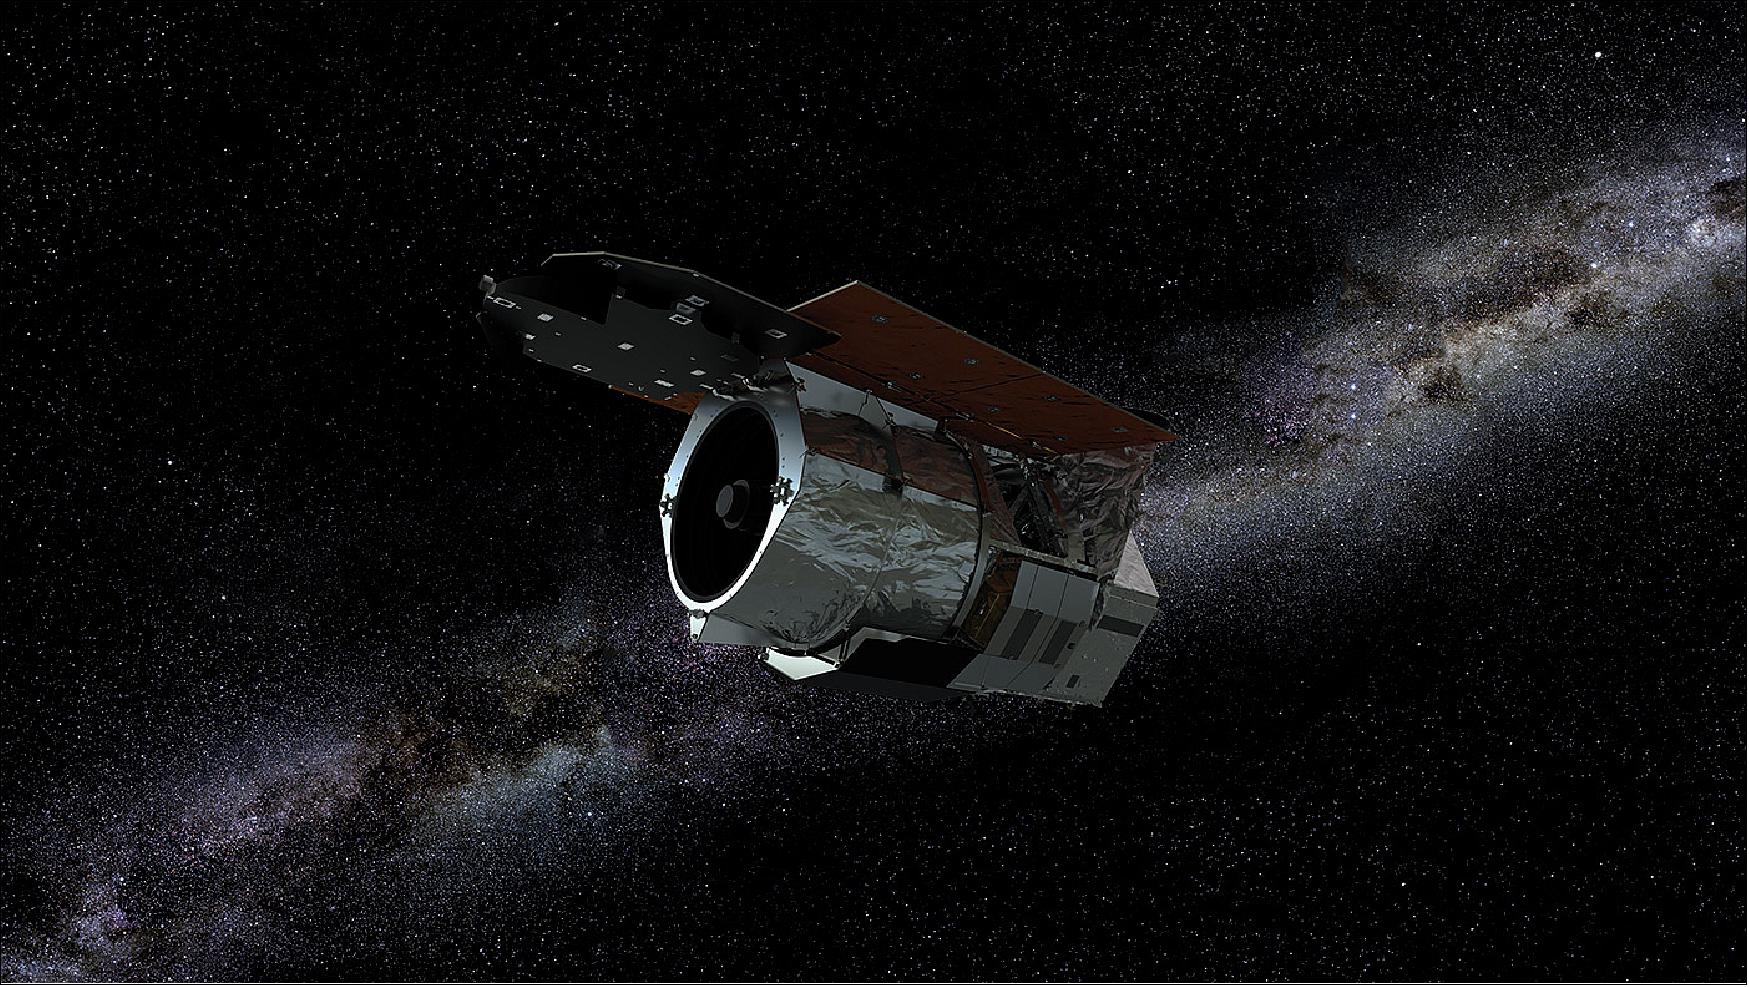 Figure 41: Artist's rendition of the WFIRST observatory, which will study multiple cosmic phenomena, including dark energy (image credit: NASA/GSFC)